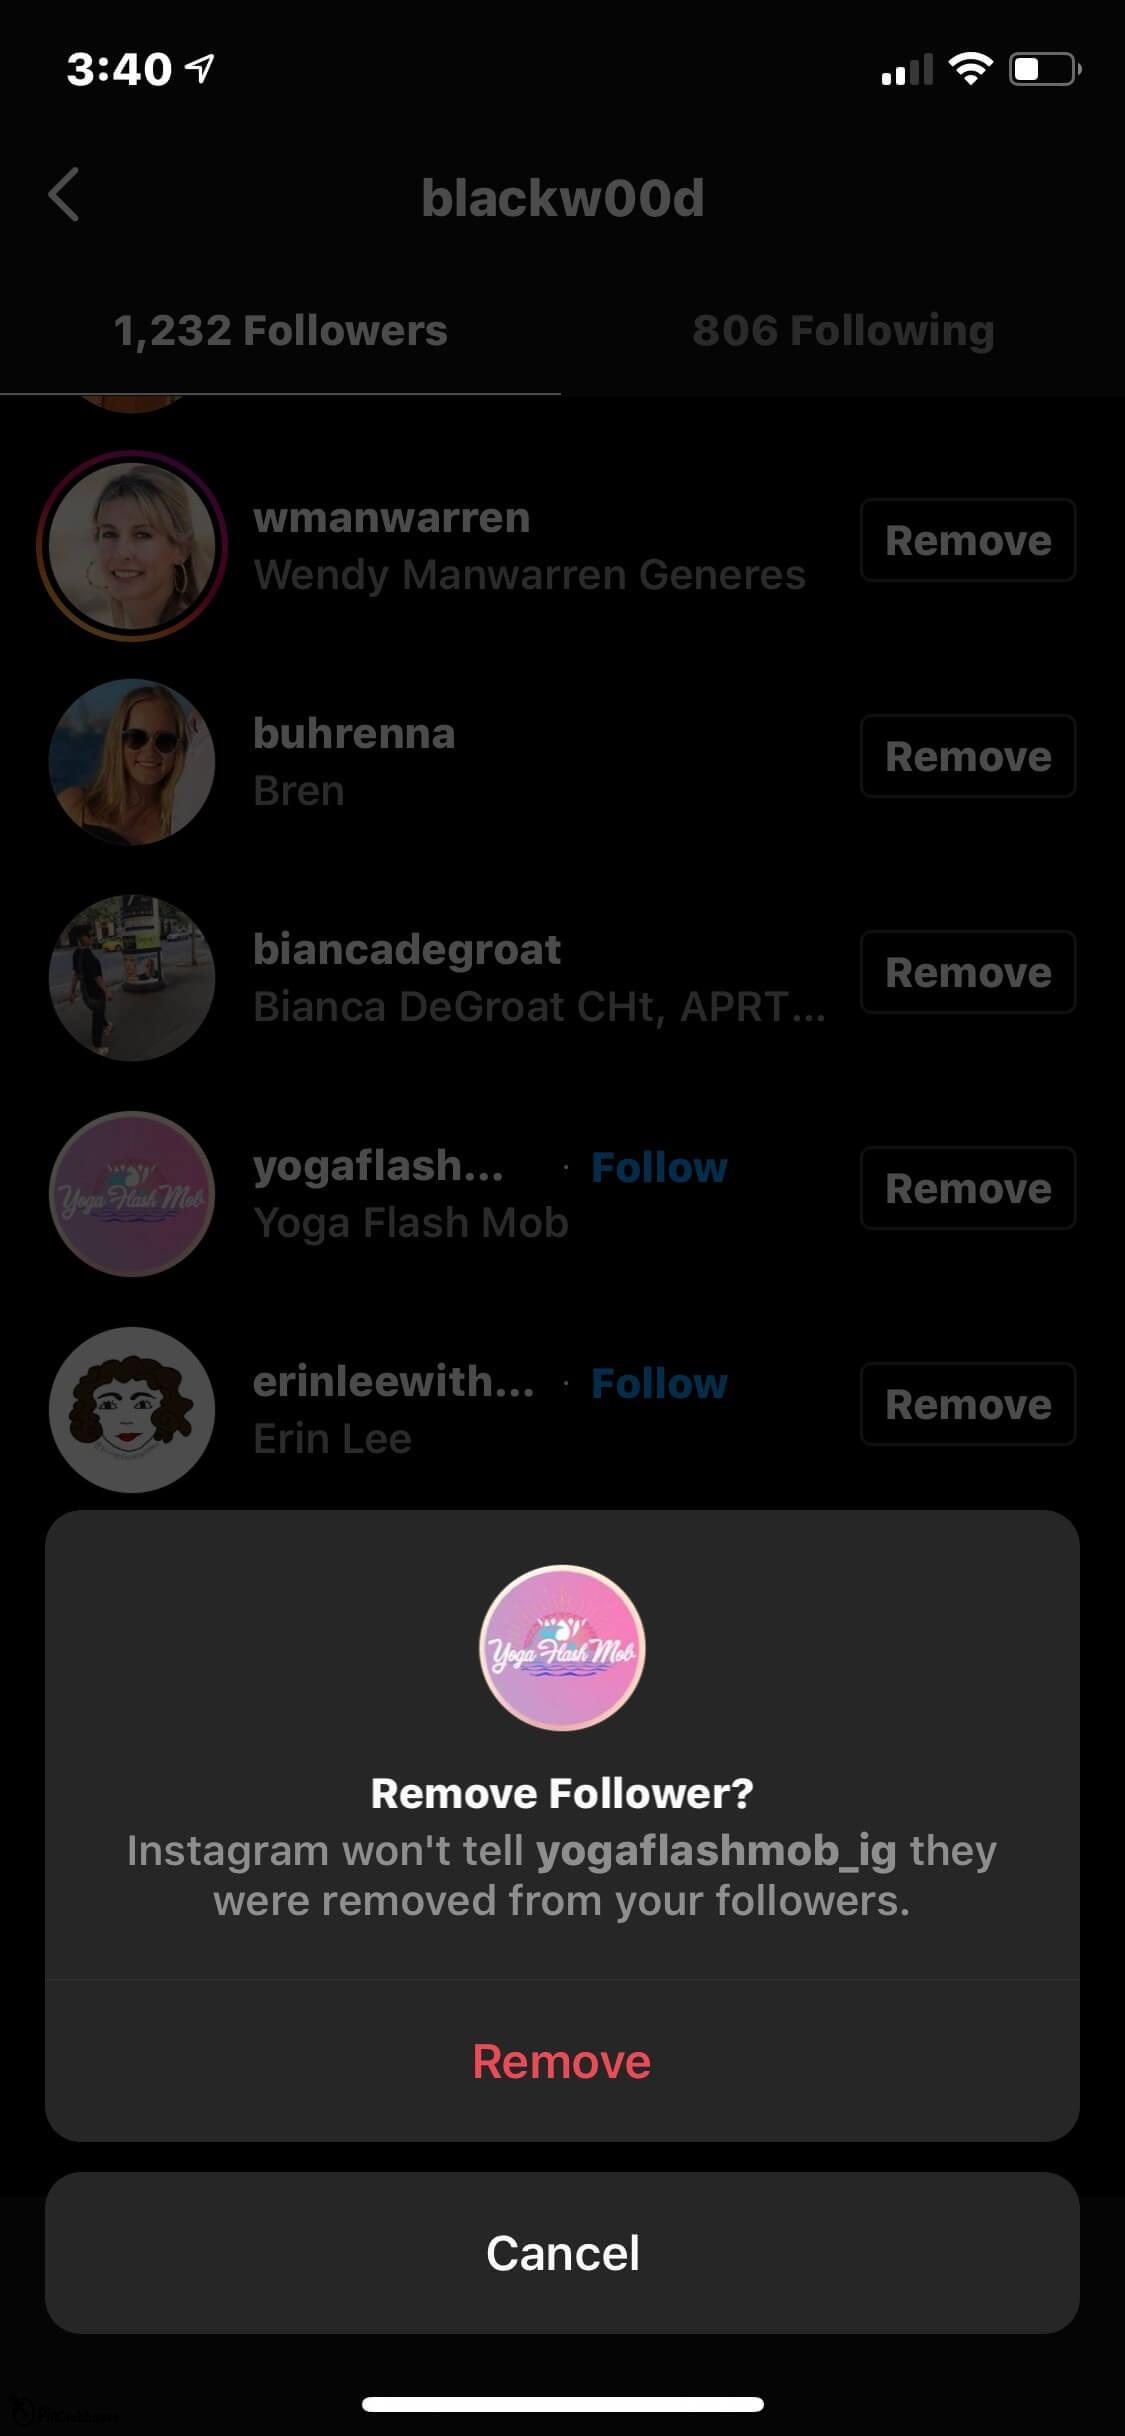 How to unfollow someone on Instagram